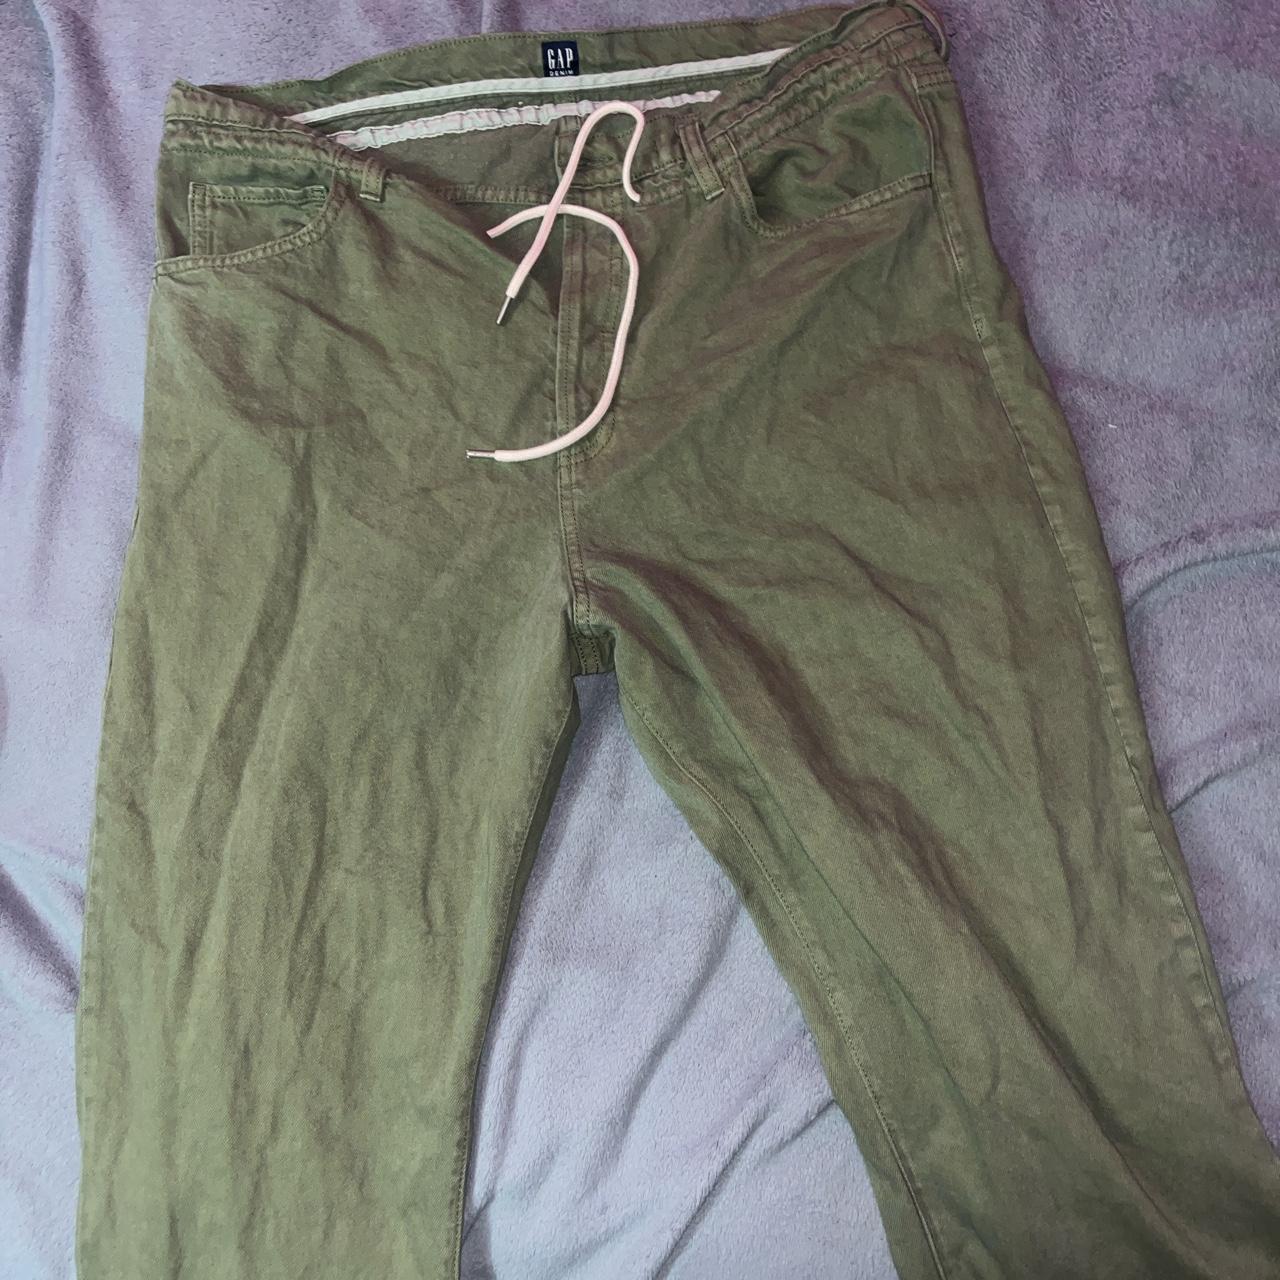 Gap Women's Green and White Jeans